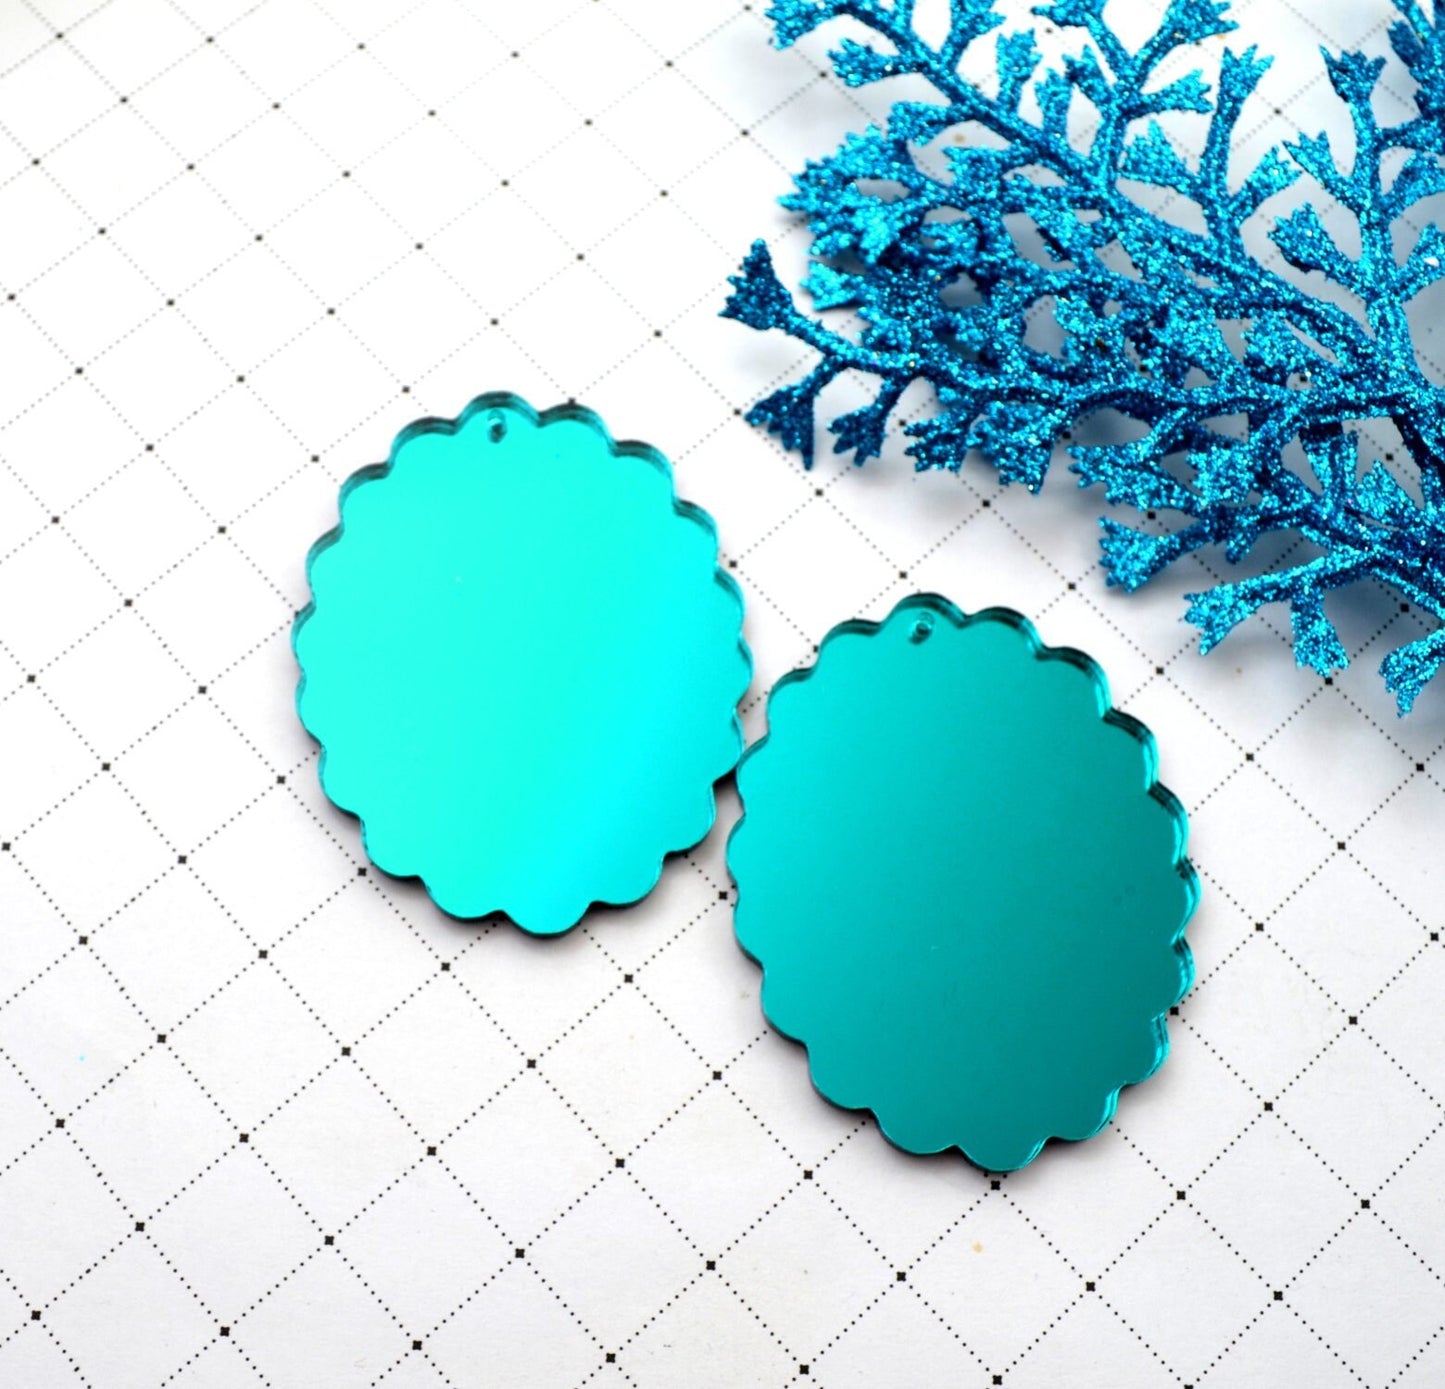 TEAL CAMEOS 30x40 mm Frame Settings Mirrored Laser Cut Acrylic